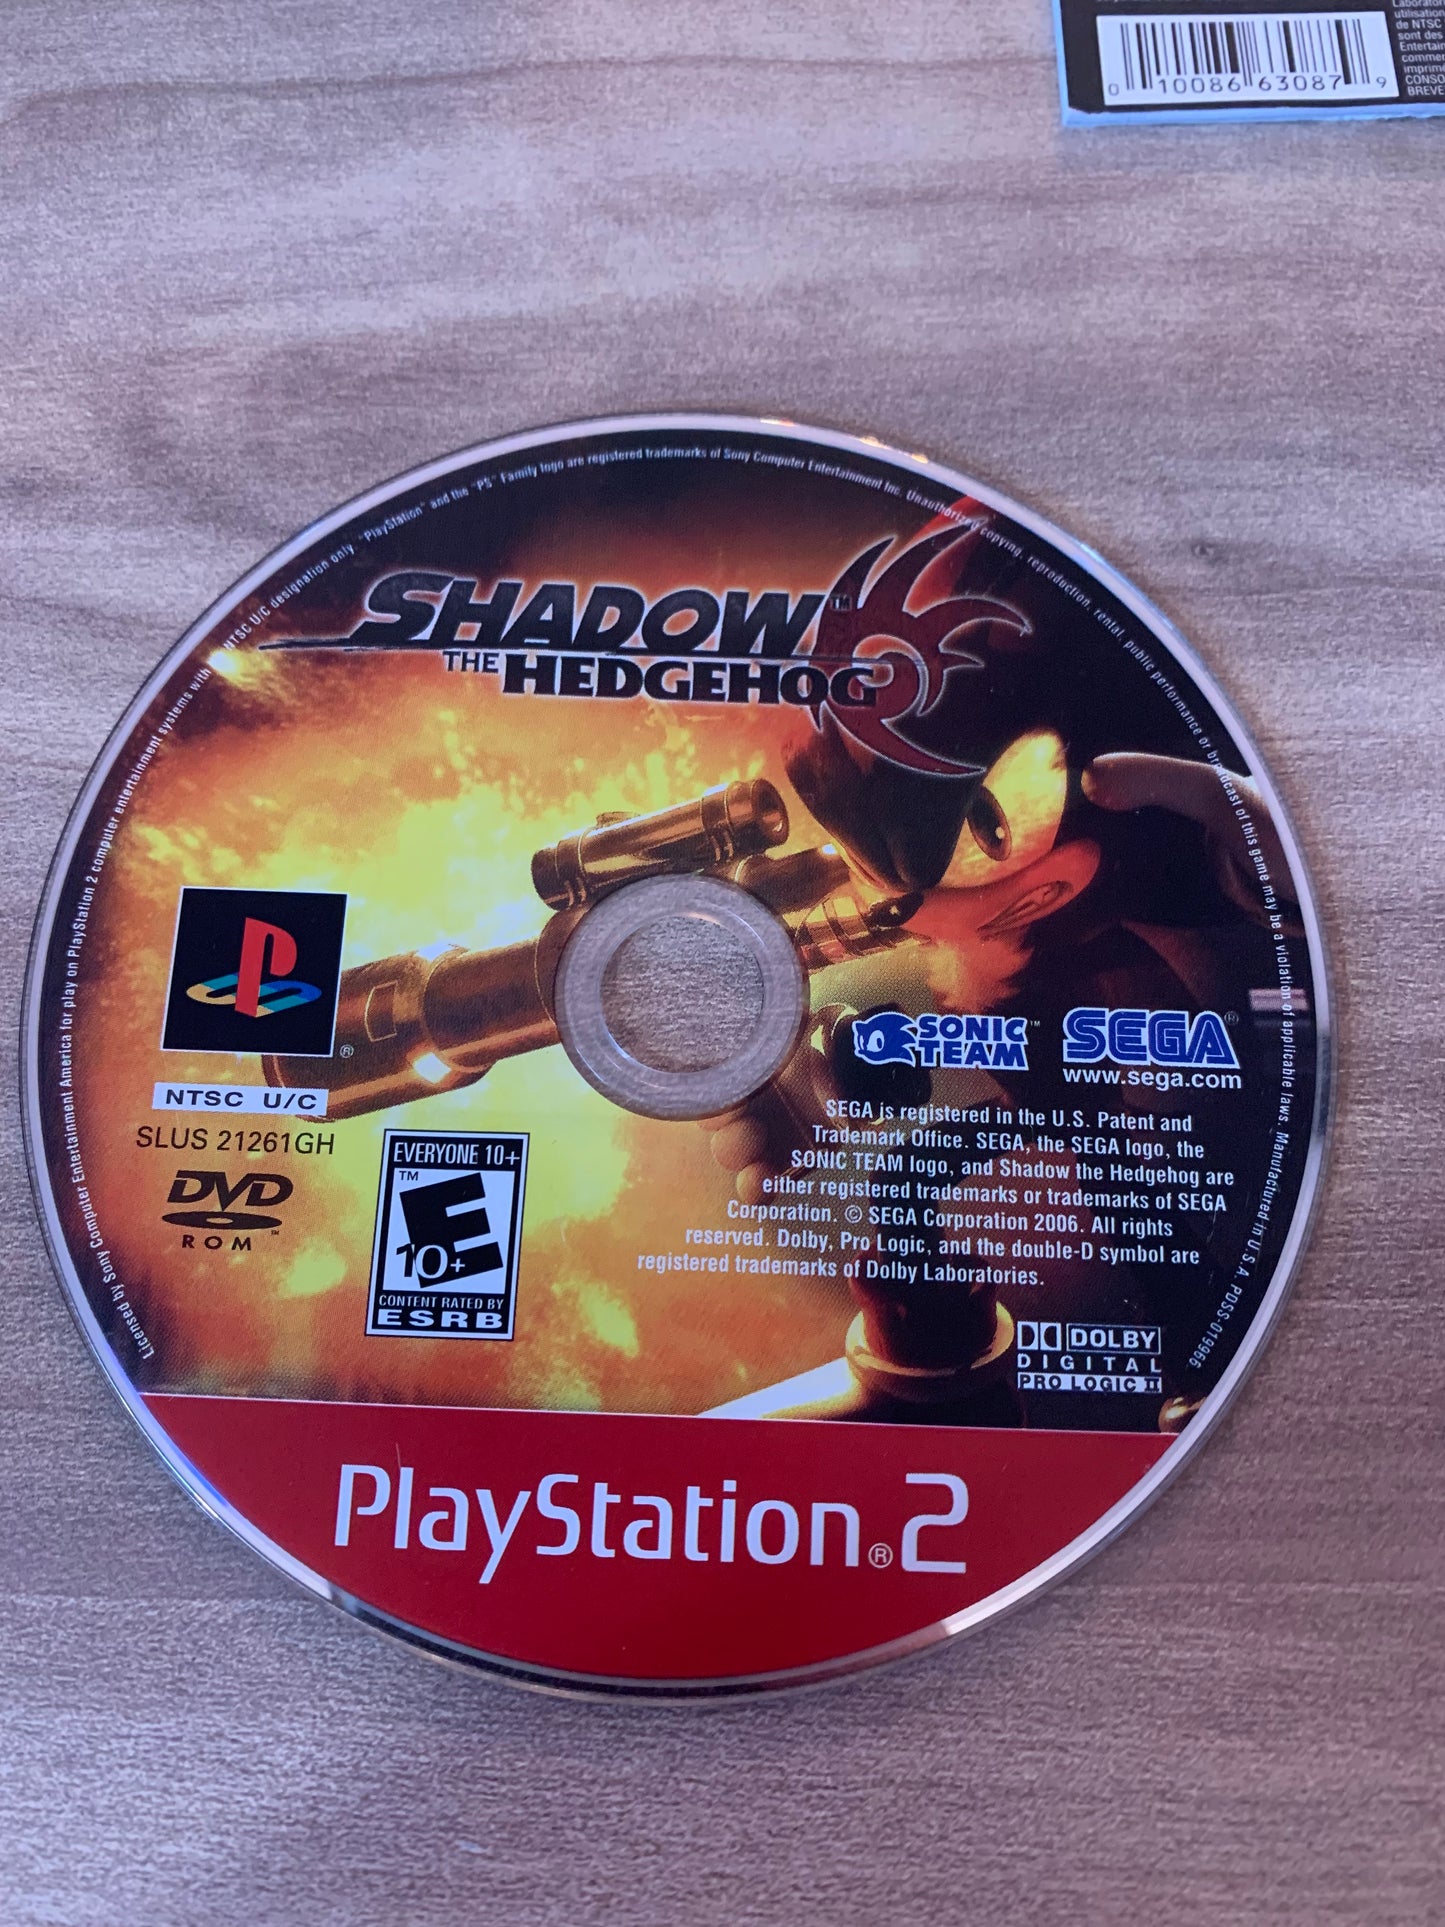 SONY PLAYSTATiON 2 [PS2] | SHADOW THE HEDGEHOG | GREATEST HiTS